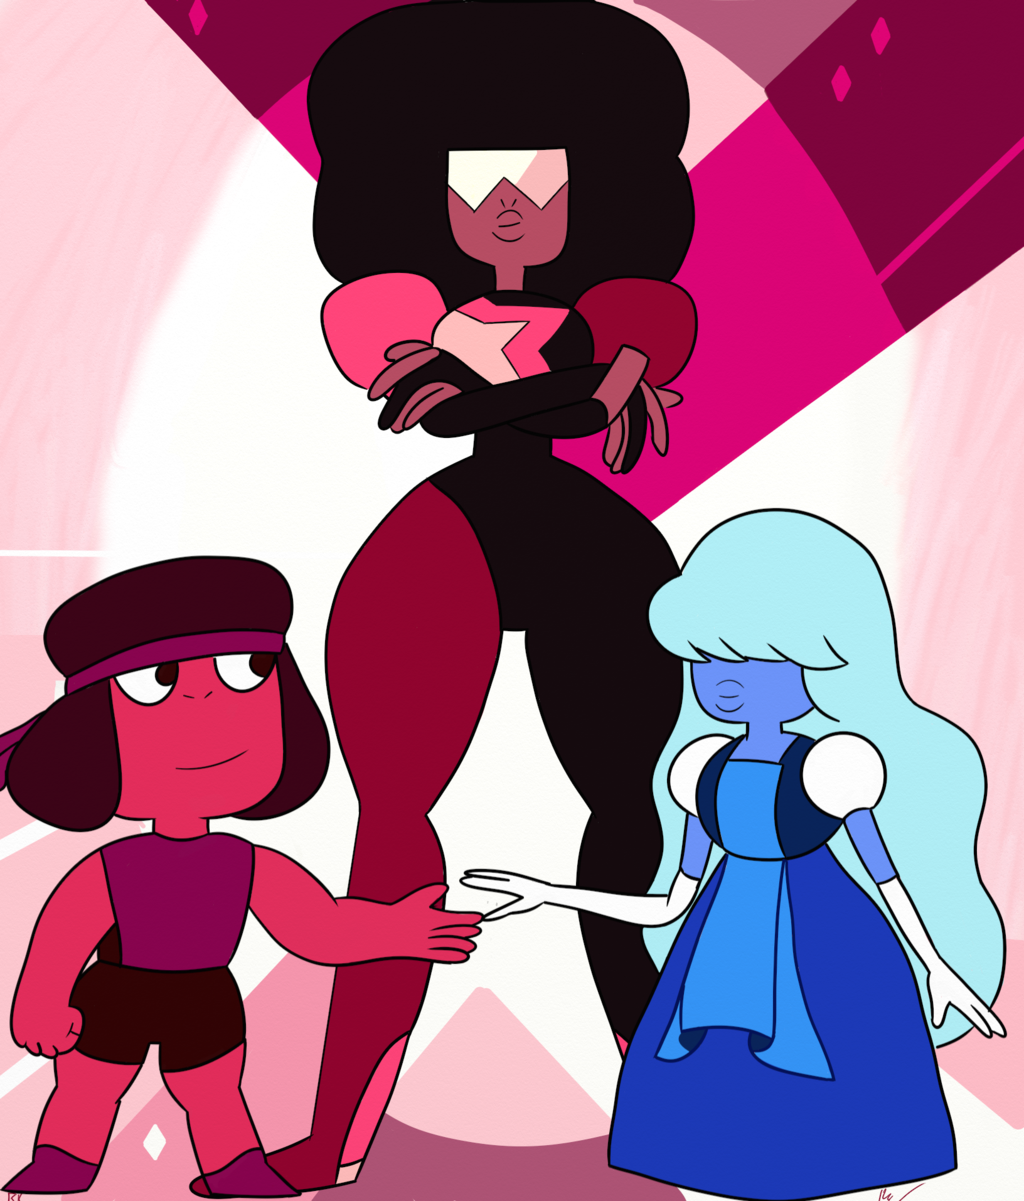 Free download steven universegarnet fusion by ryckfox on x for your desktop mobile tablet explore garnet steven universe wallpaper hd steven universe wallpaper steven universe wallpaper hd steven universe wallpaper